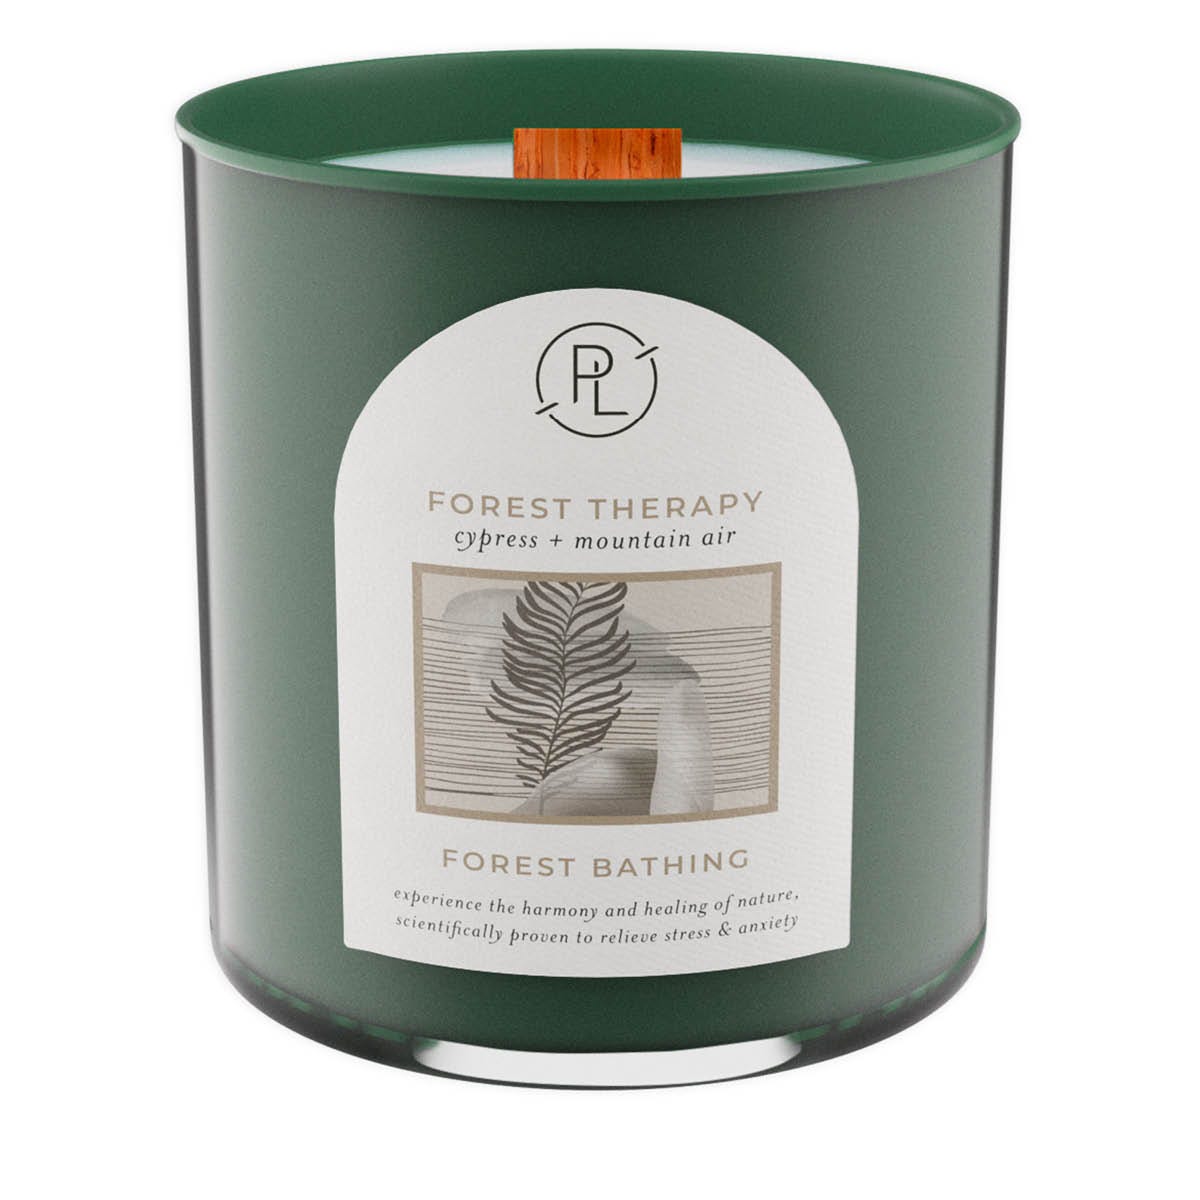 Forest Therapy: cypress + mountain air Jar Candle - PartyLite US